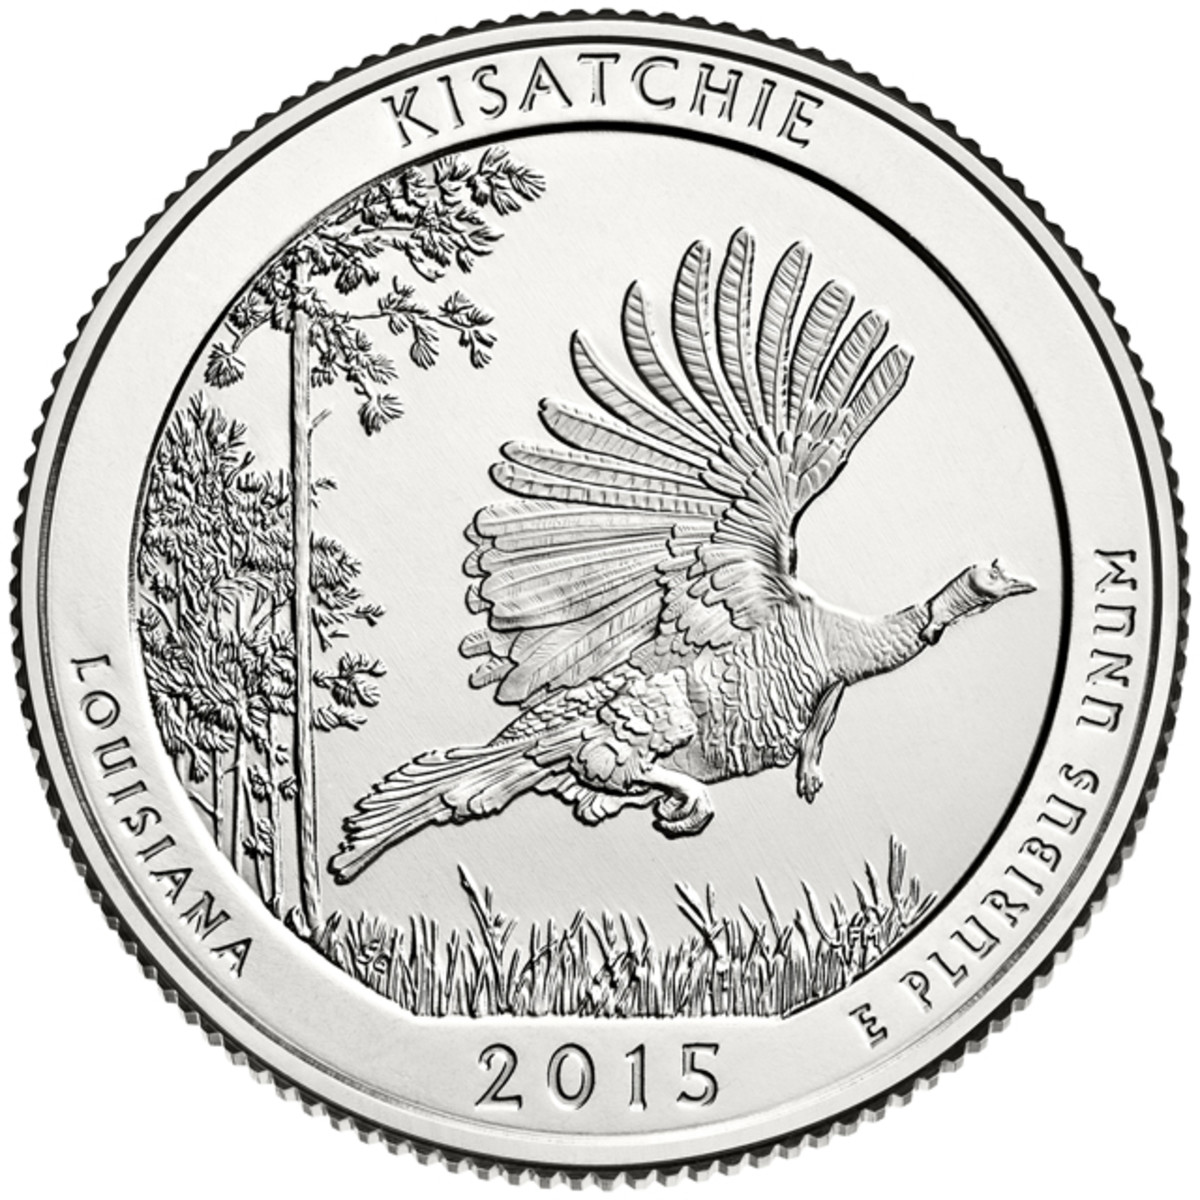 The bird on the 2015 Kisatchie National Forest quarter is the Northeastern Sea-Whack.